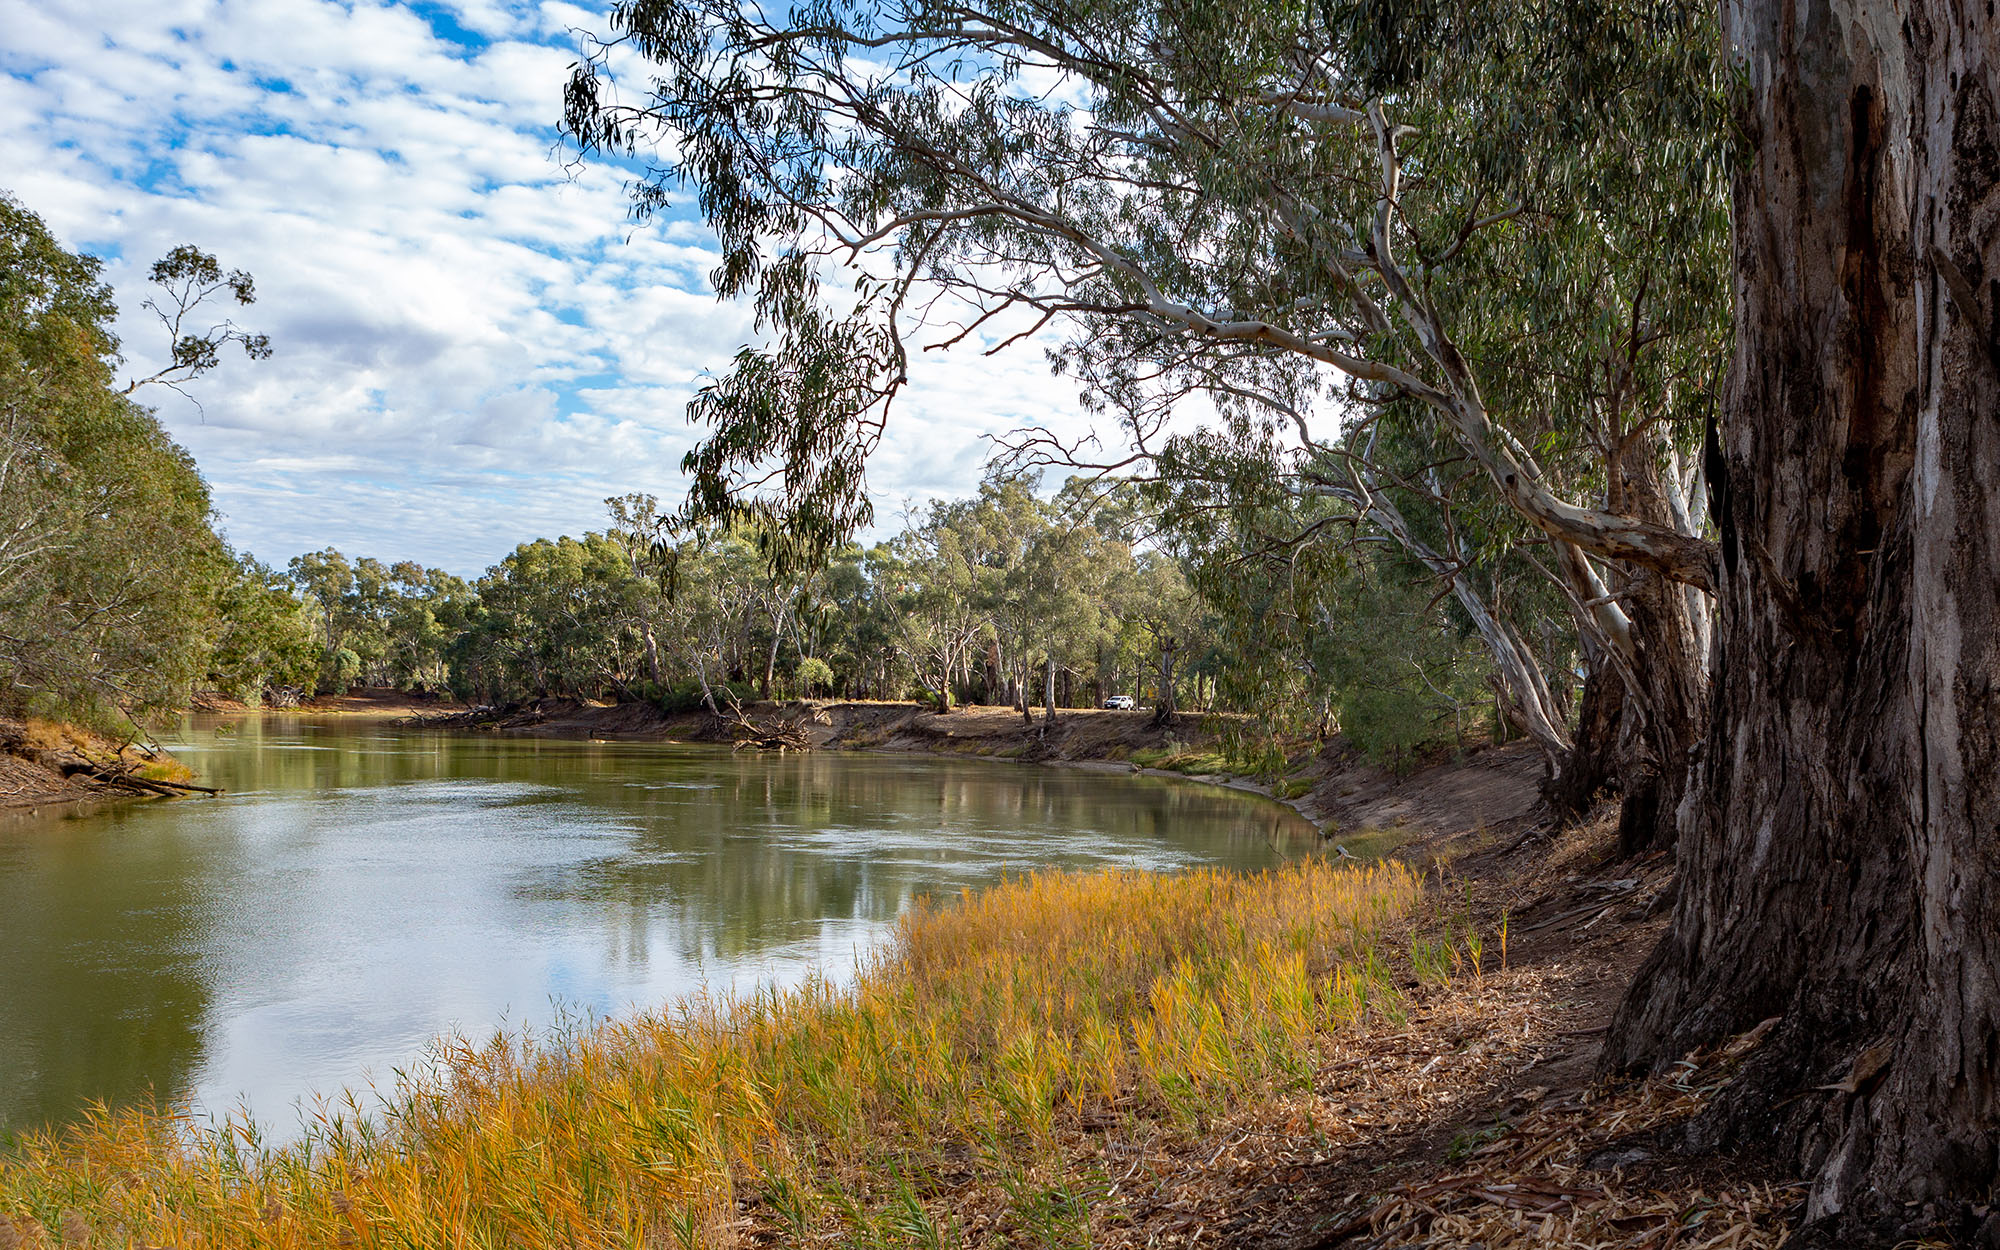 The redgum trees on the banks of the River Murray in Tooleybuc, New South Wales.